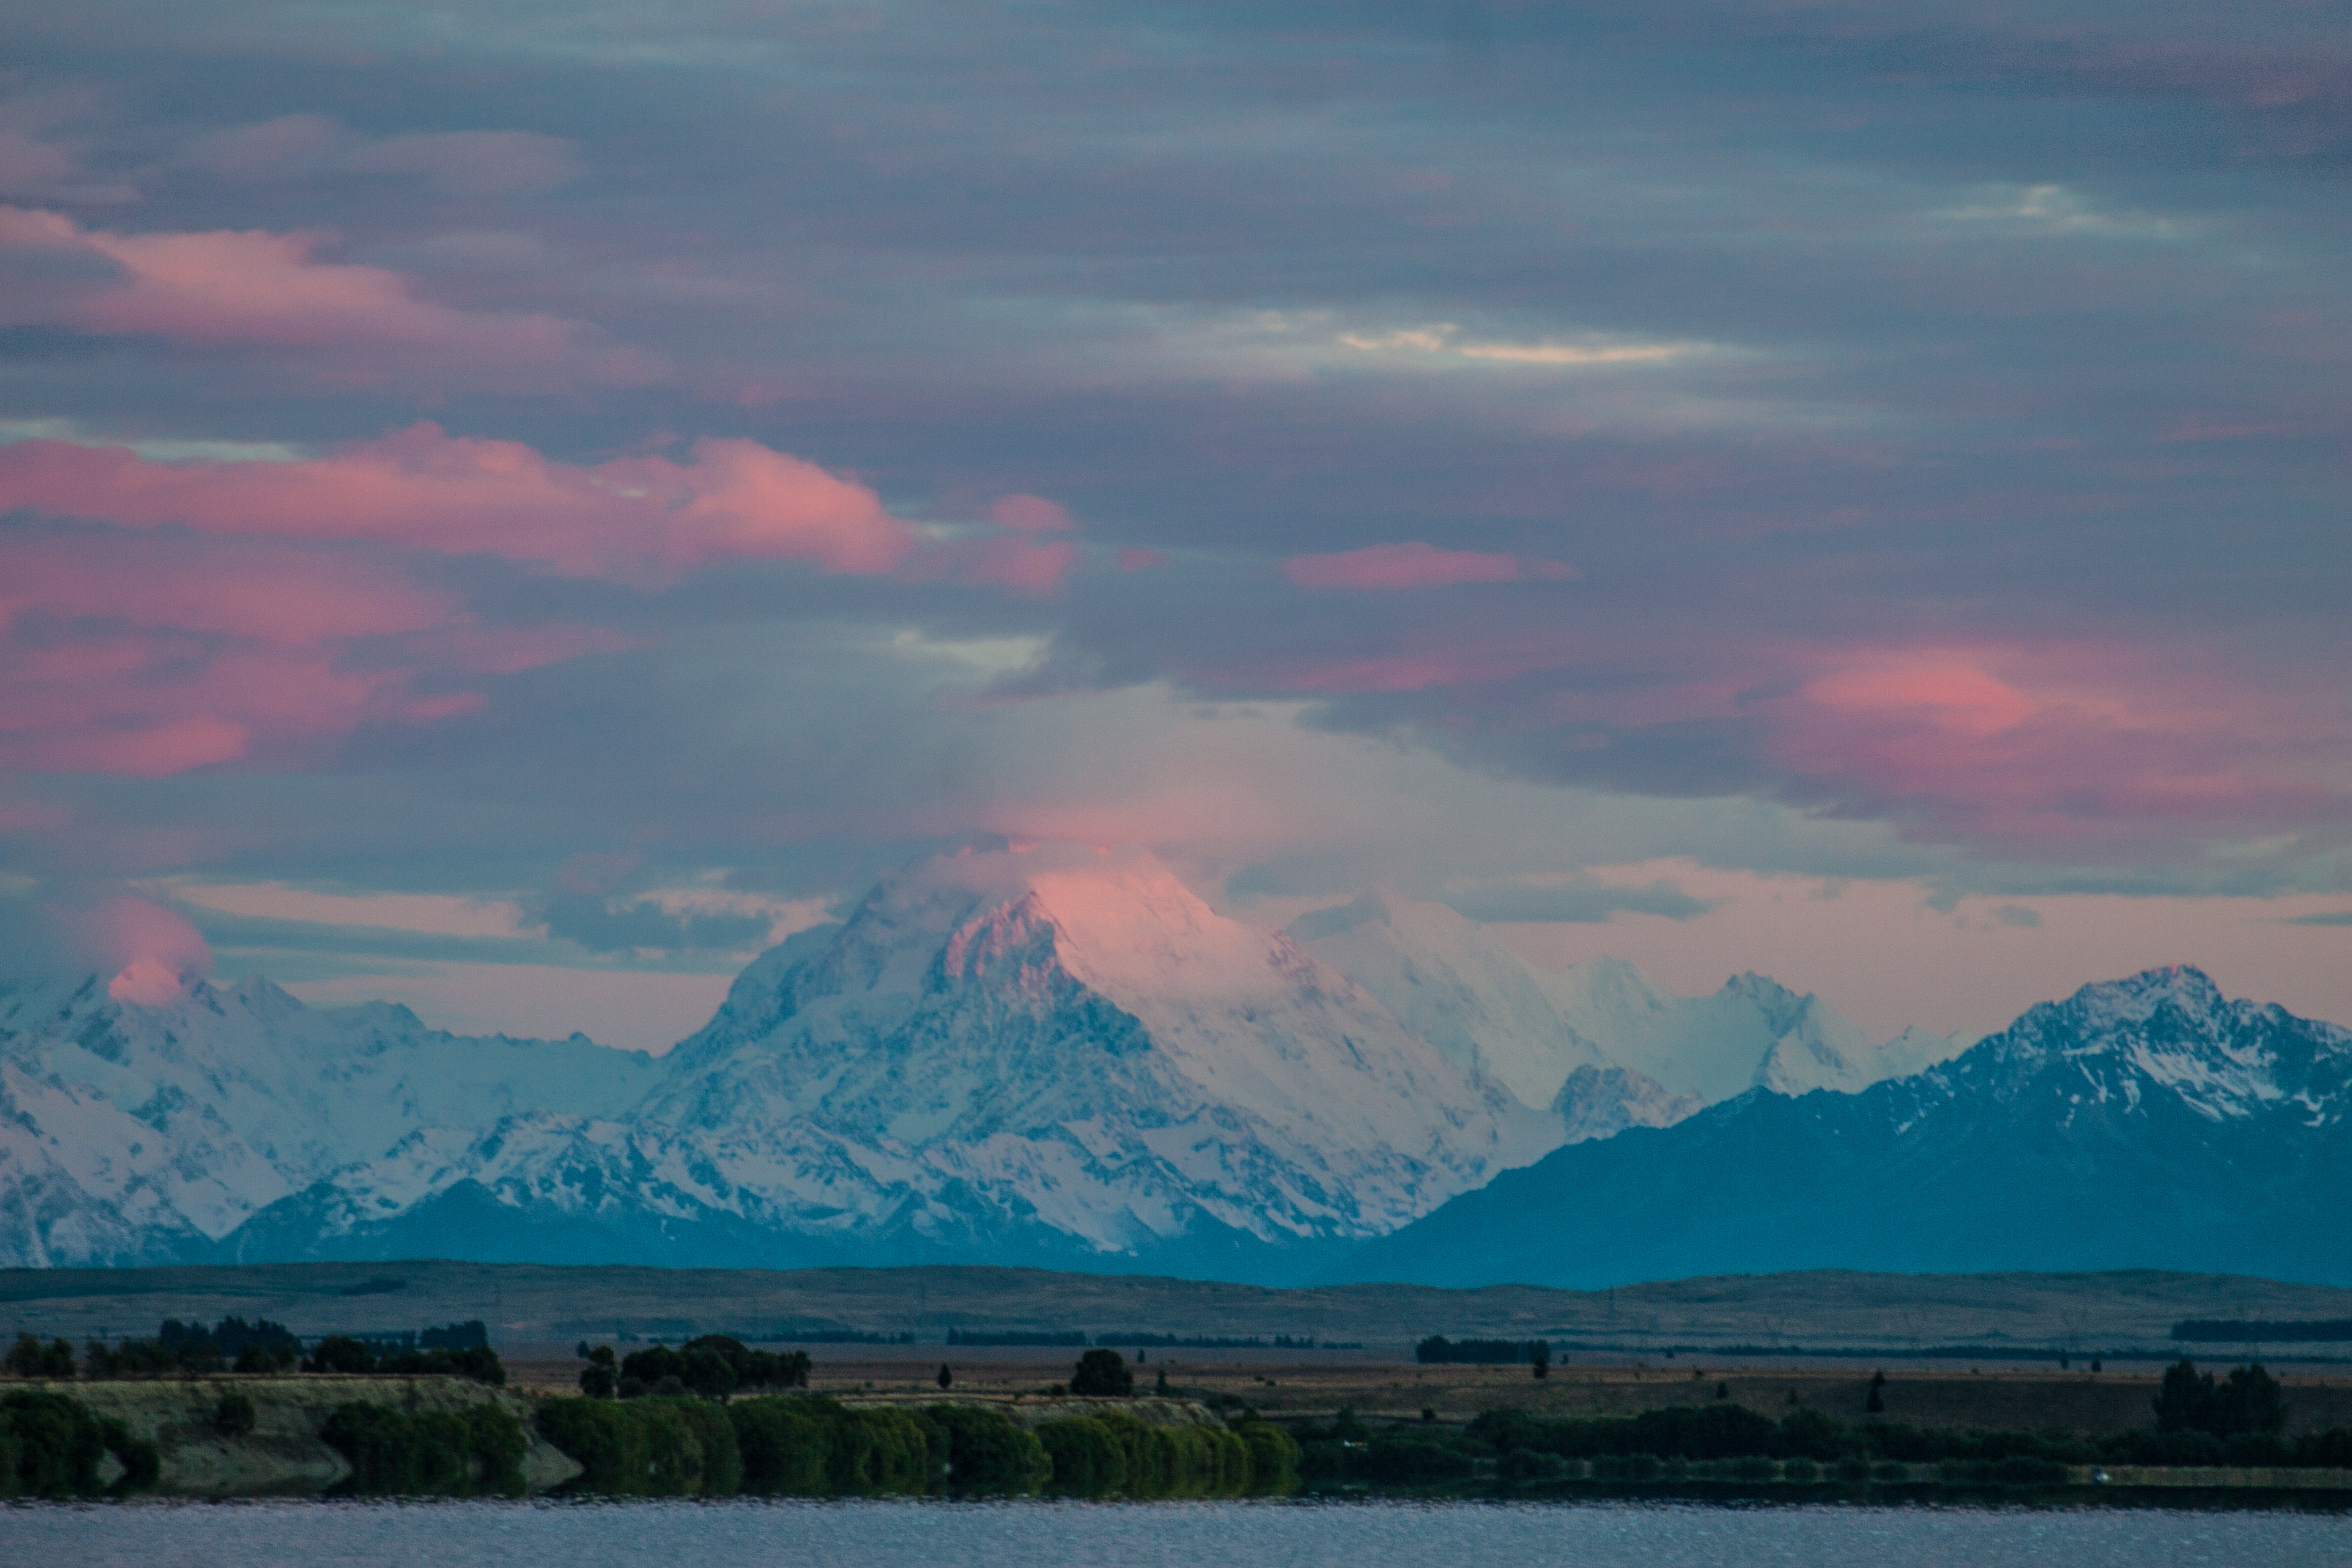 mt cook at dawn, sunrise pink mountain